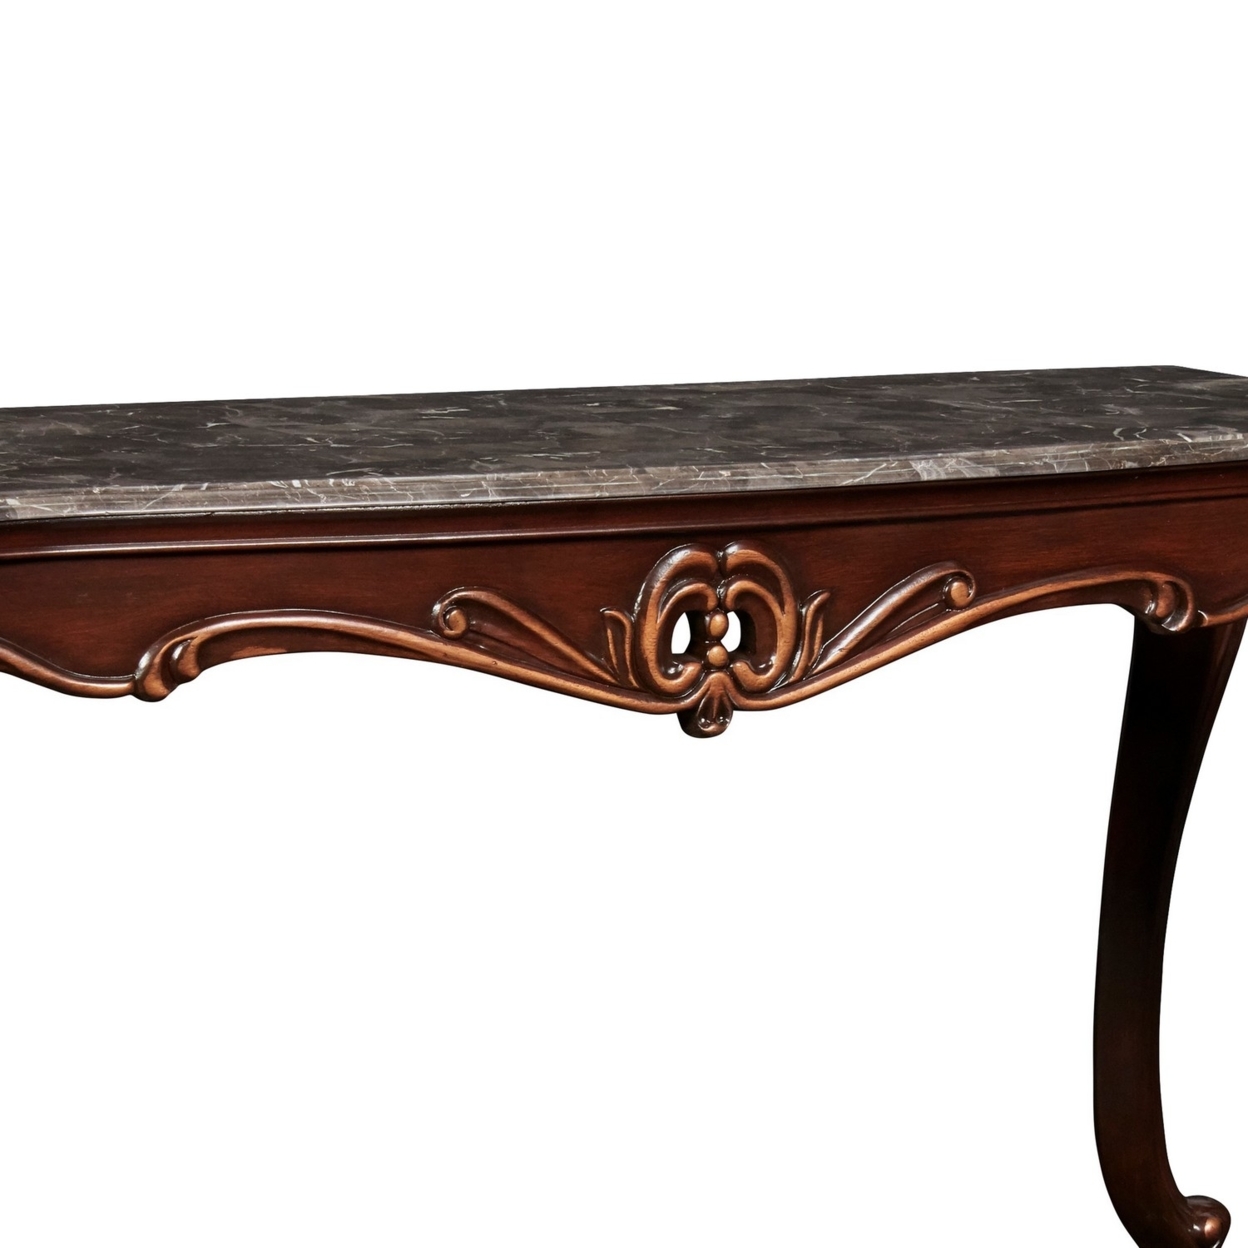 Wooden Console Table With Marble Top And Carved Details, Gray And Brown- Saltoro Sherpi